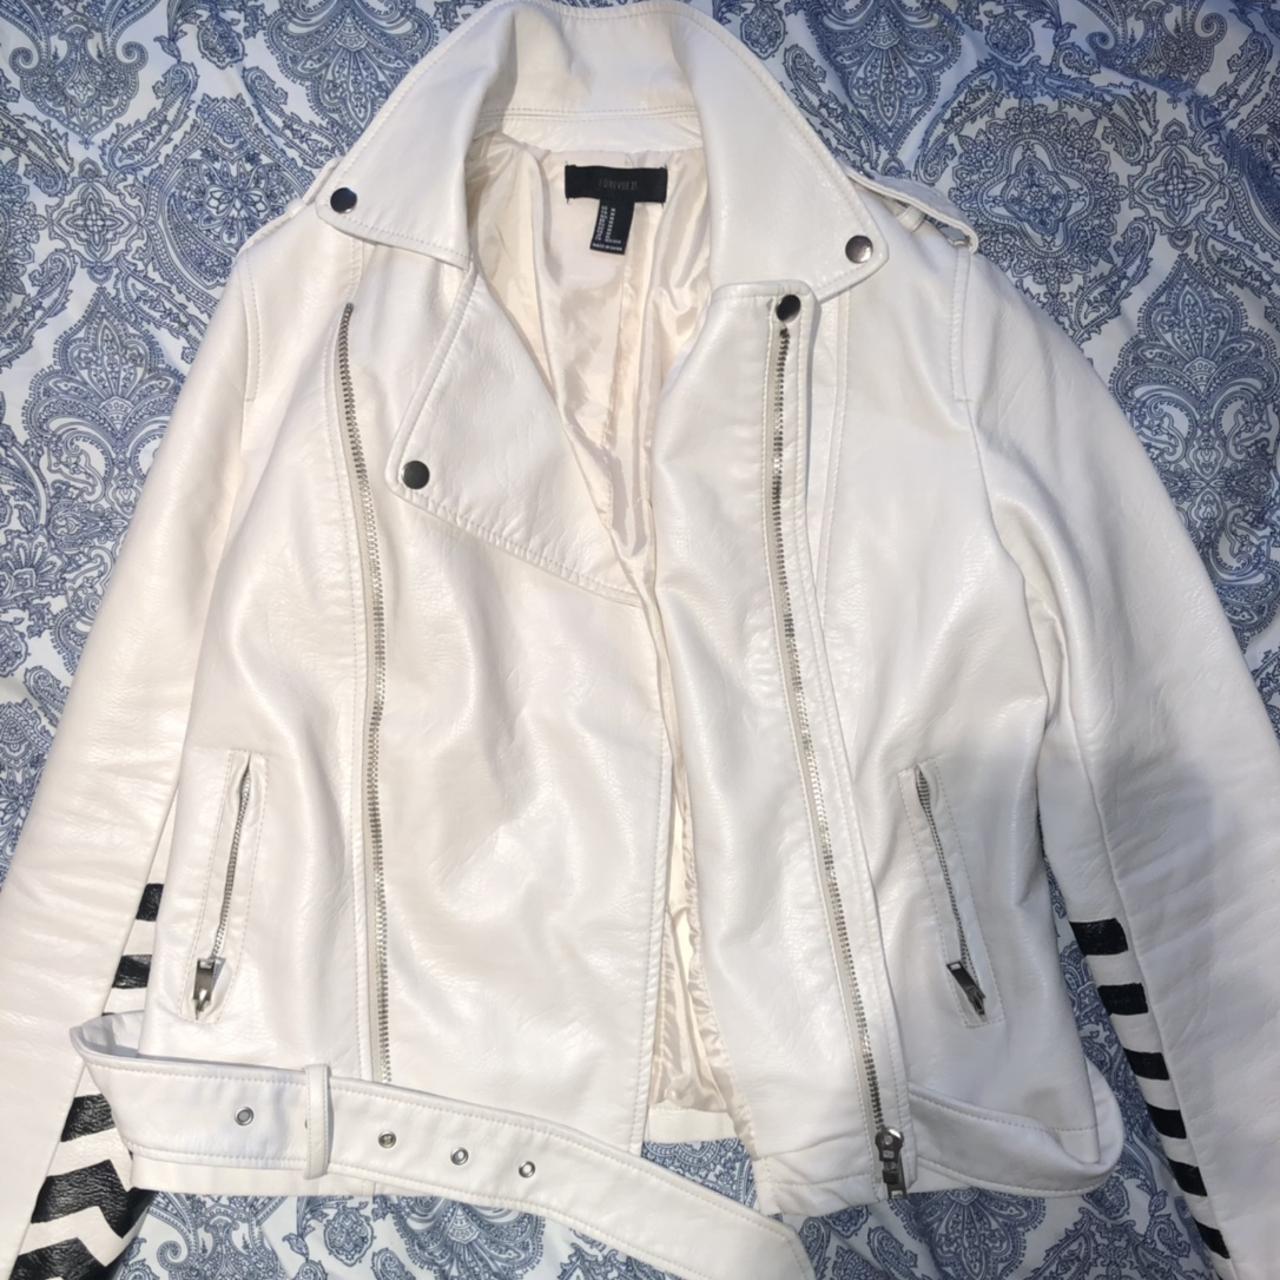 Urban Outfitters Women's White and Red Jacket | Depop